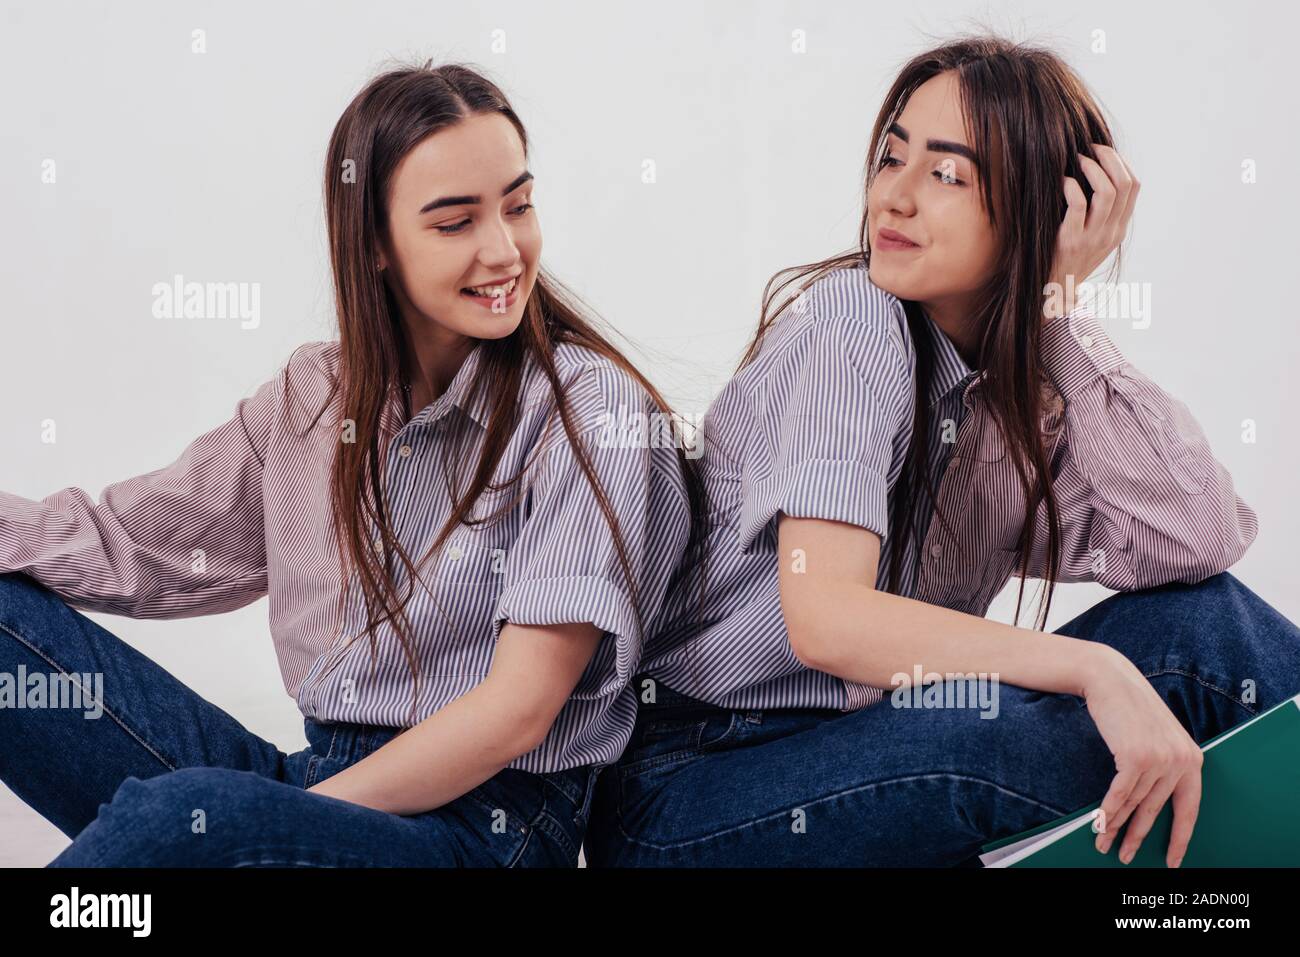 beautiful girls two sisters twins sitting and posing in the studio with white background 2ADN00J